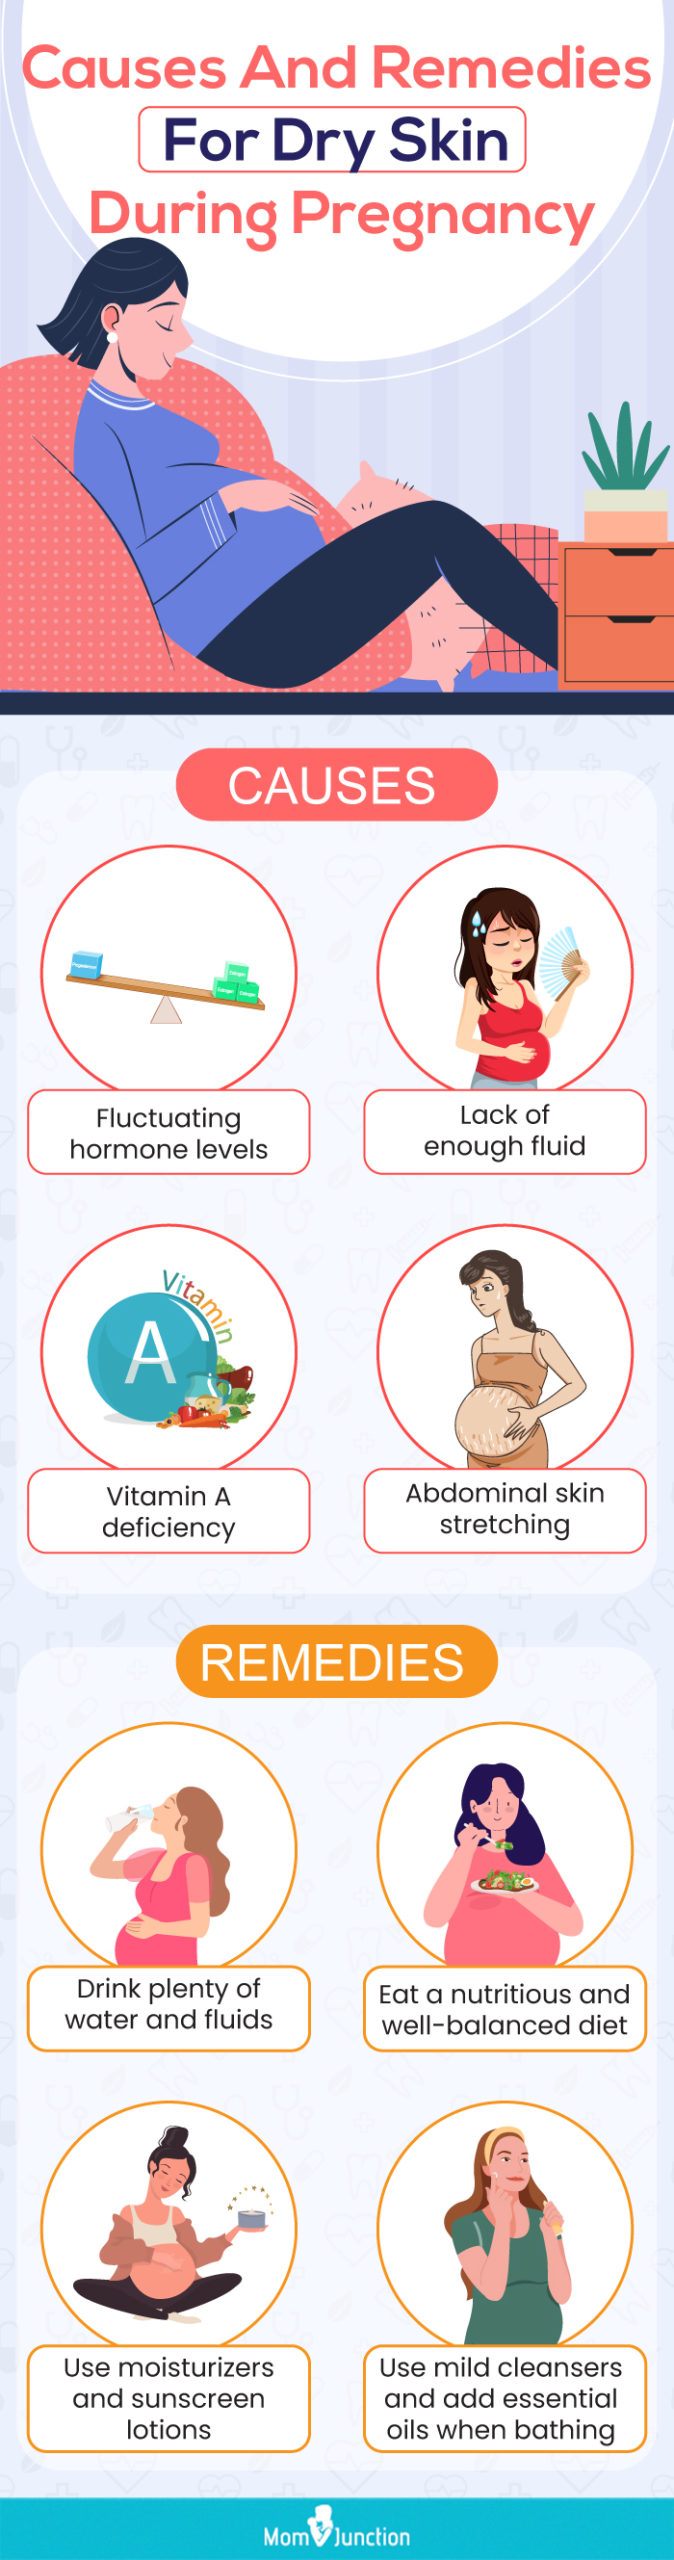 causes and remedies for dry skin during pregnancy (infographic)